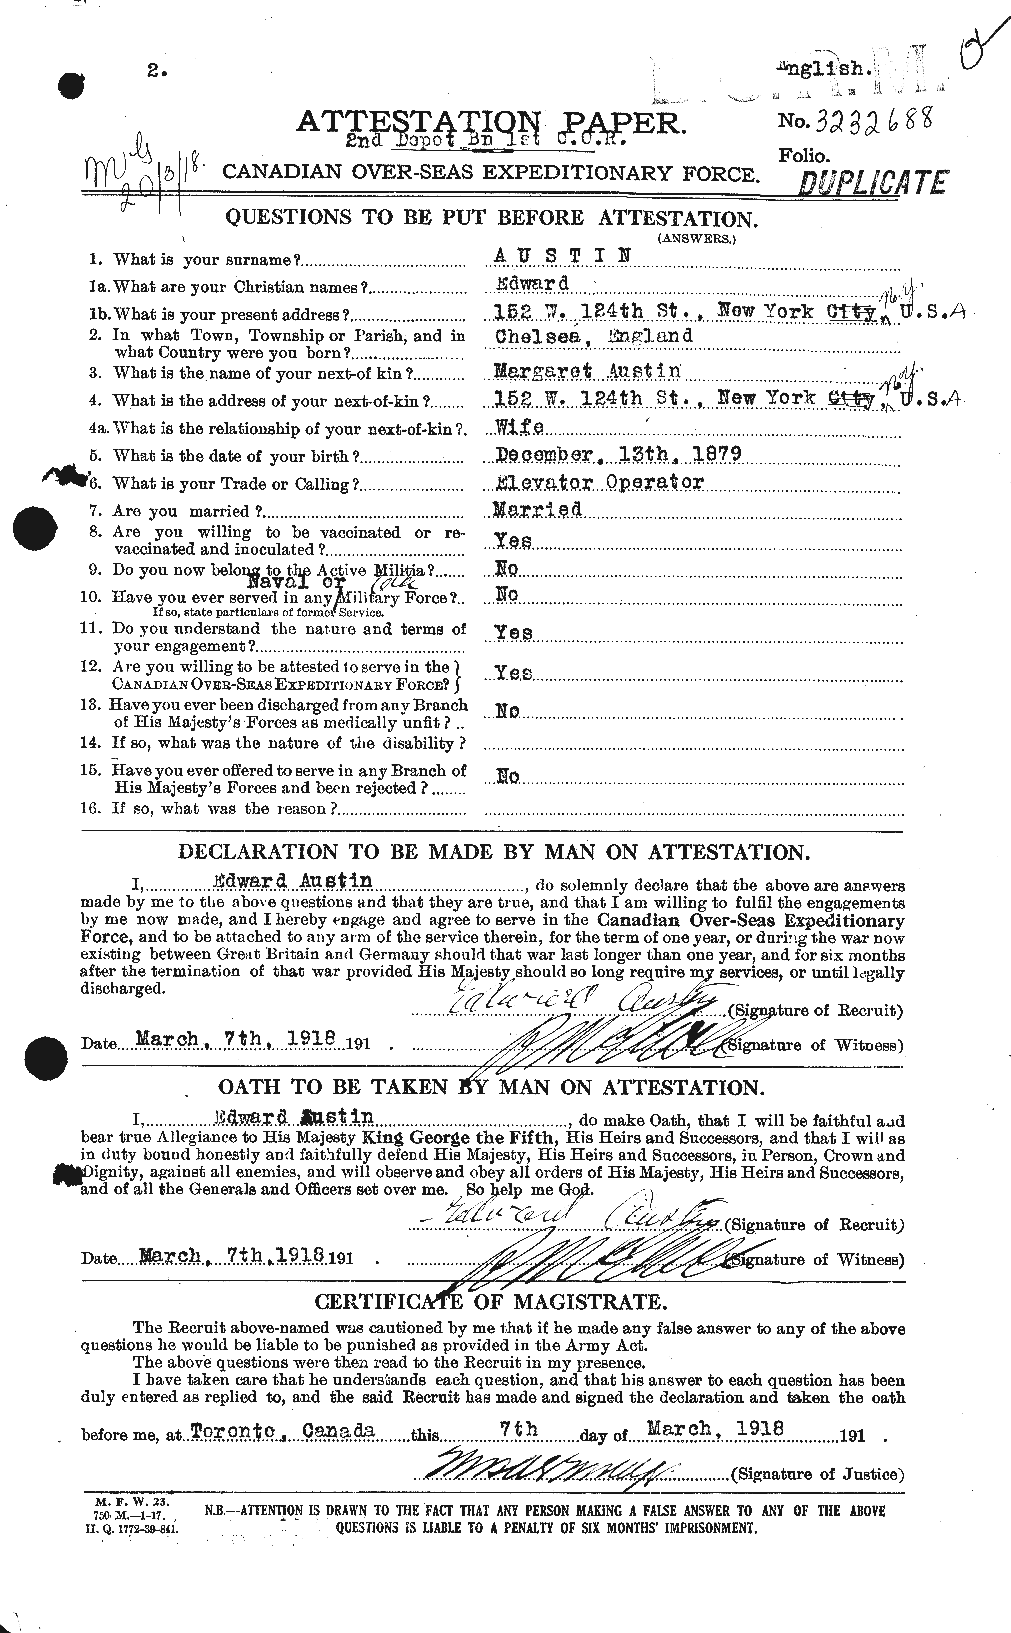 Personnel Records of the First World War - CEF 215430a